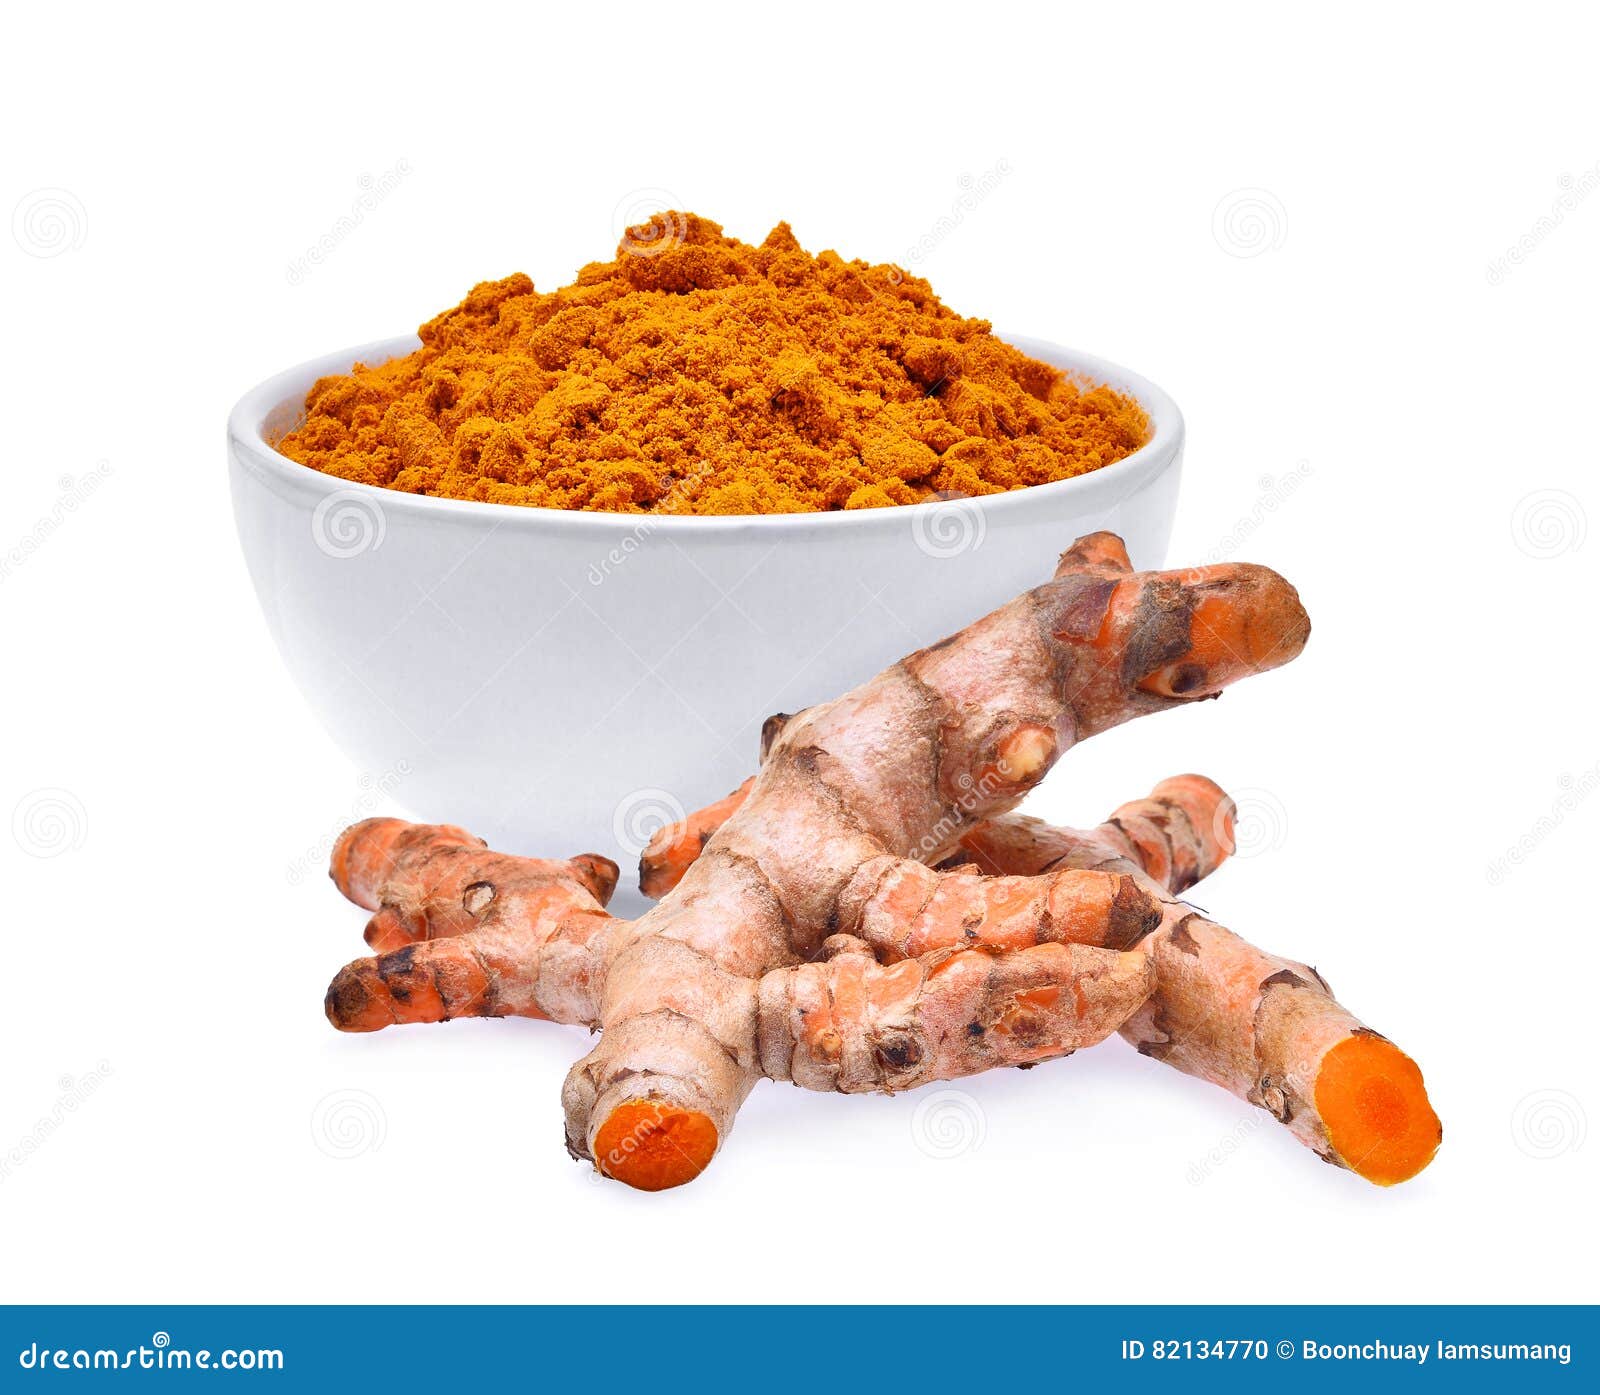 Fresh Turmeric Root And Dry Turmeric Powder In White Bowl Isolated On